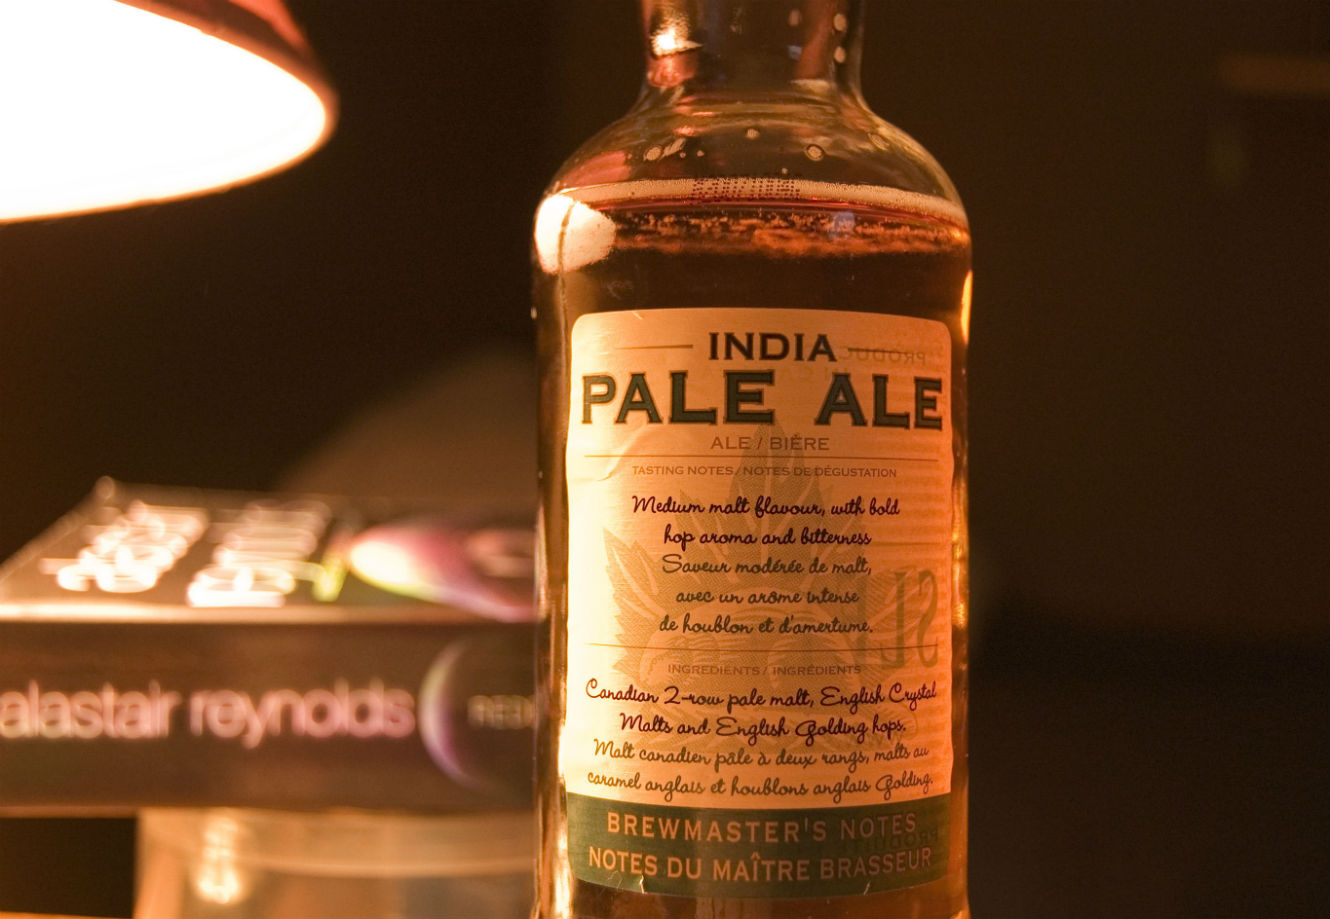 India. IPA: the beer for the British imperial arsenal?